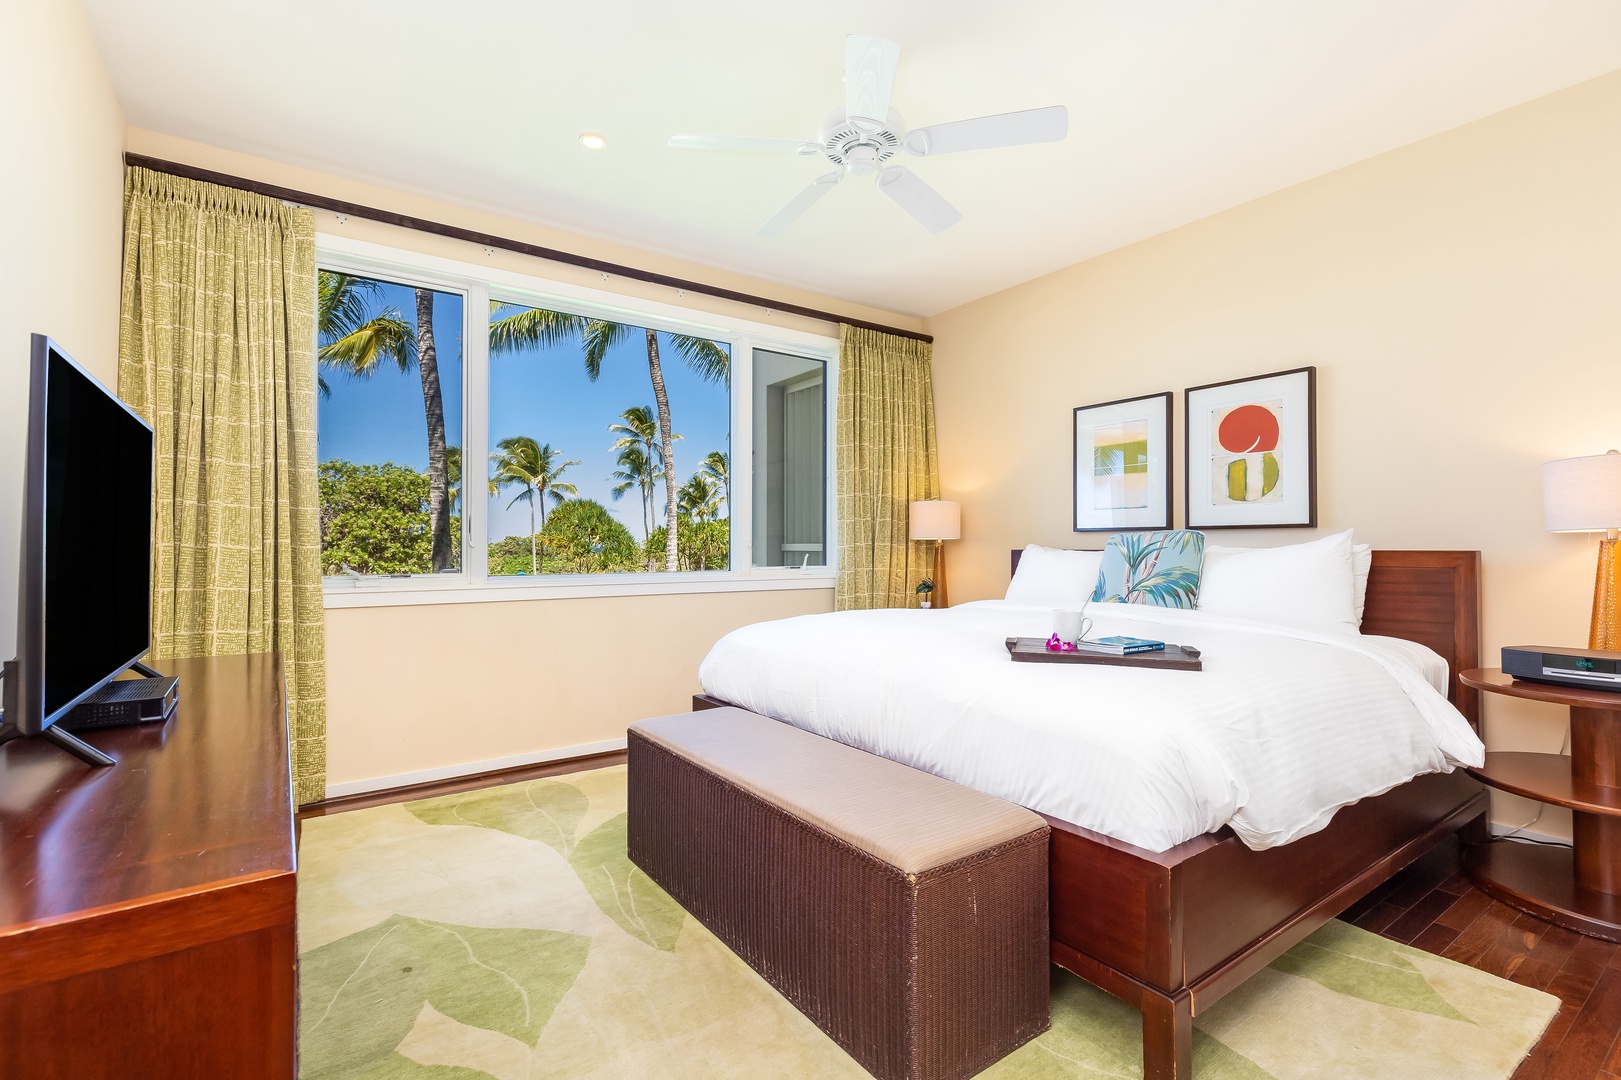 Kahuku Vacation Rentals, Turtle Bay Villas 201 - second guest bedroom with a King-size bed